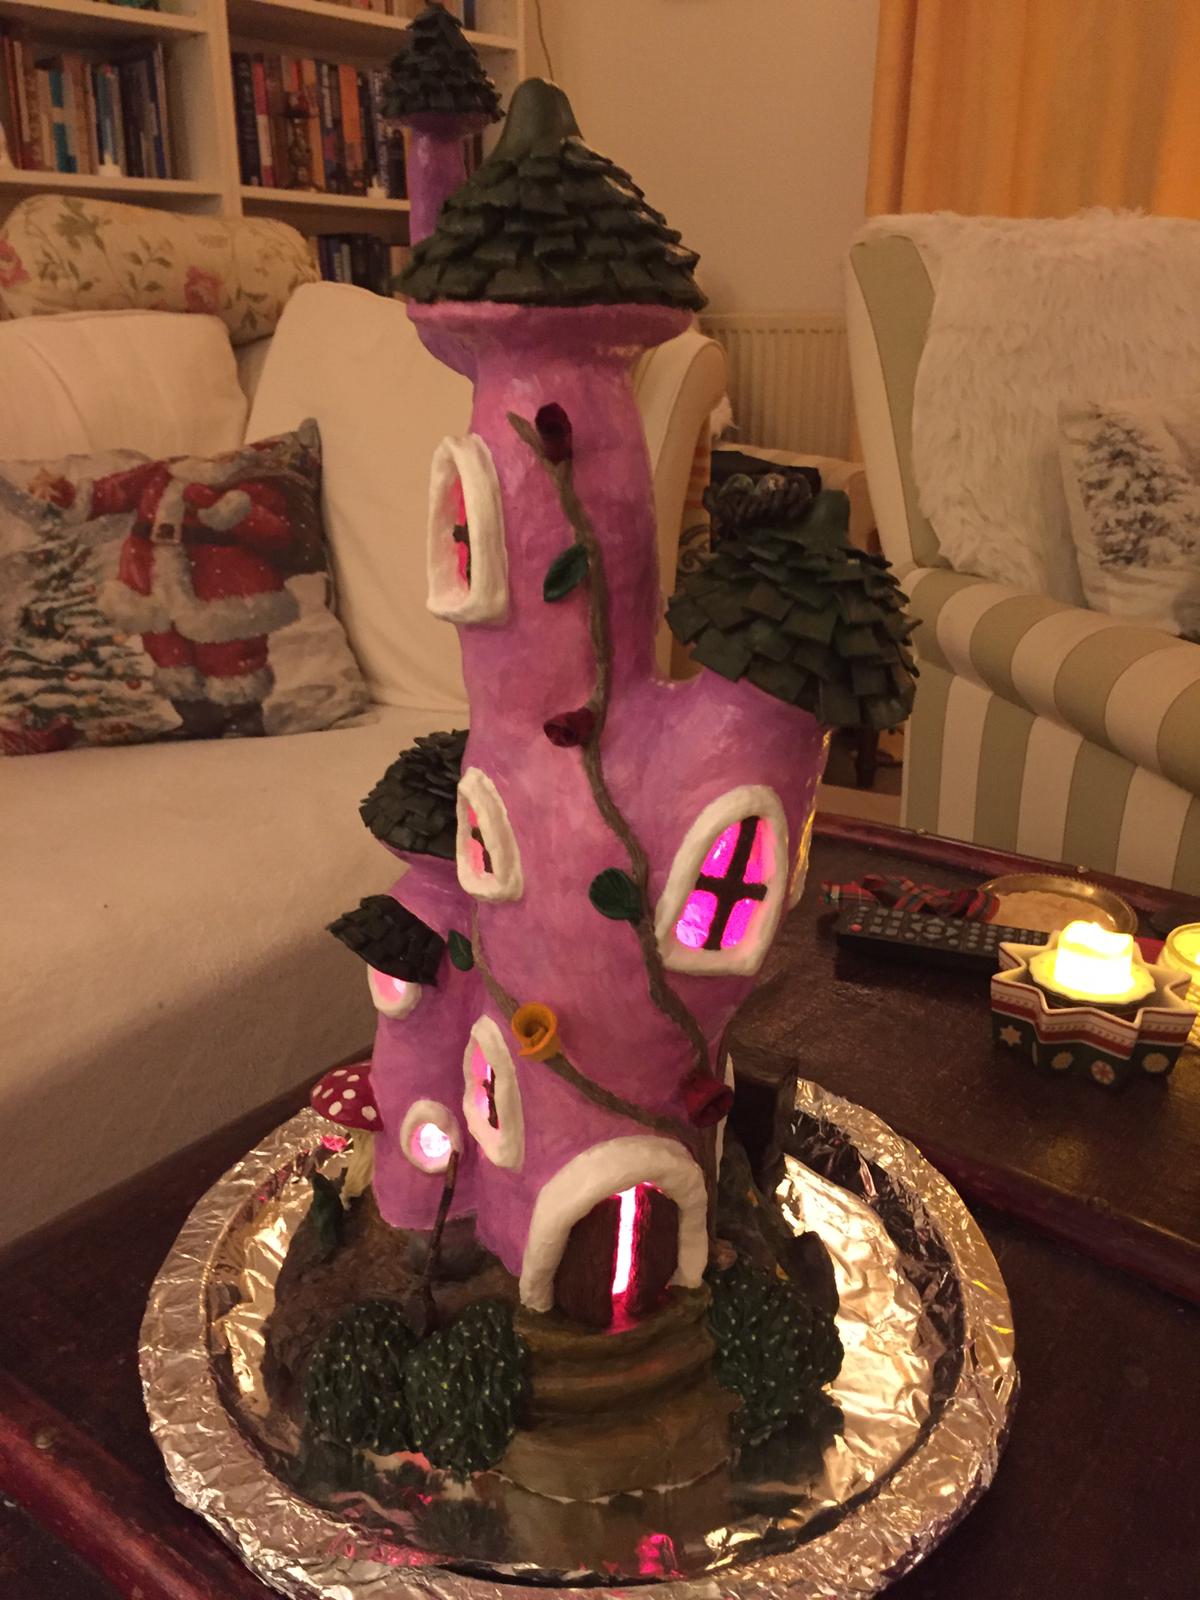 A finished fairy house lamp all lit up